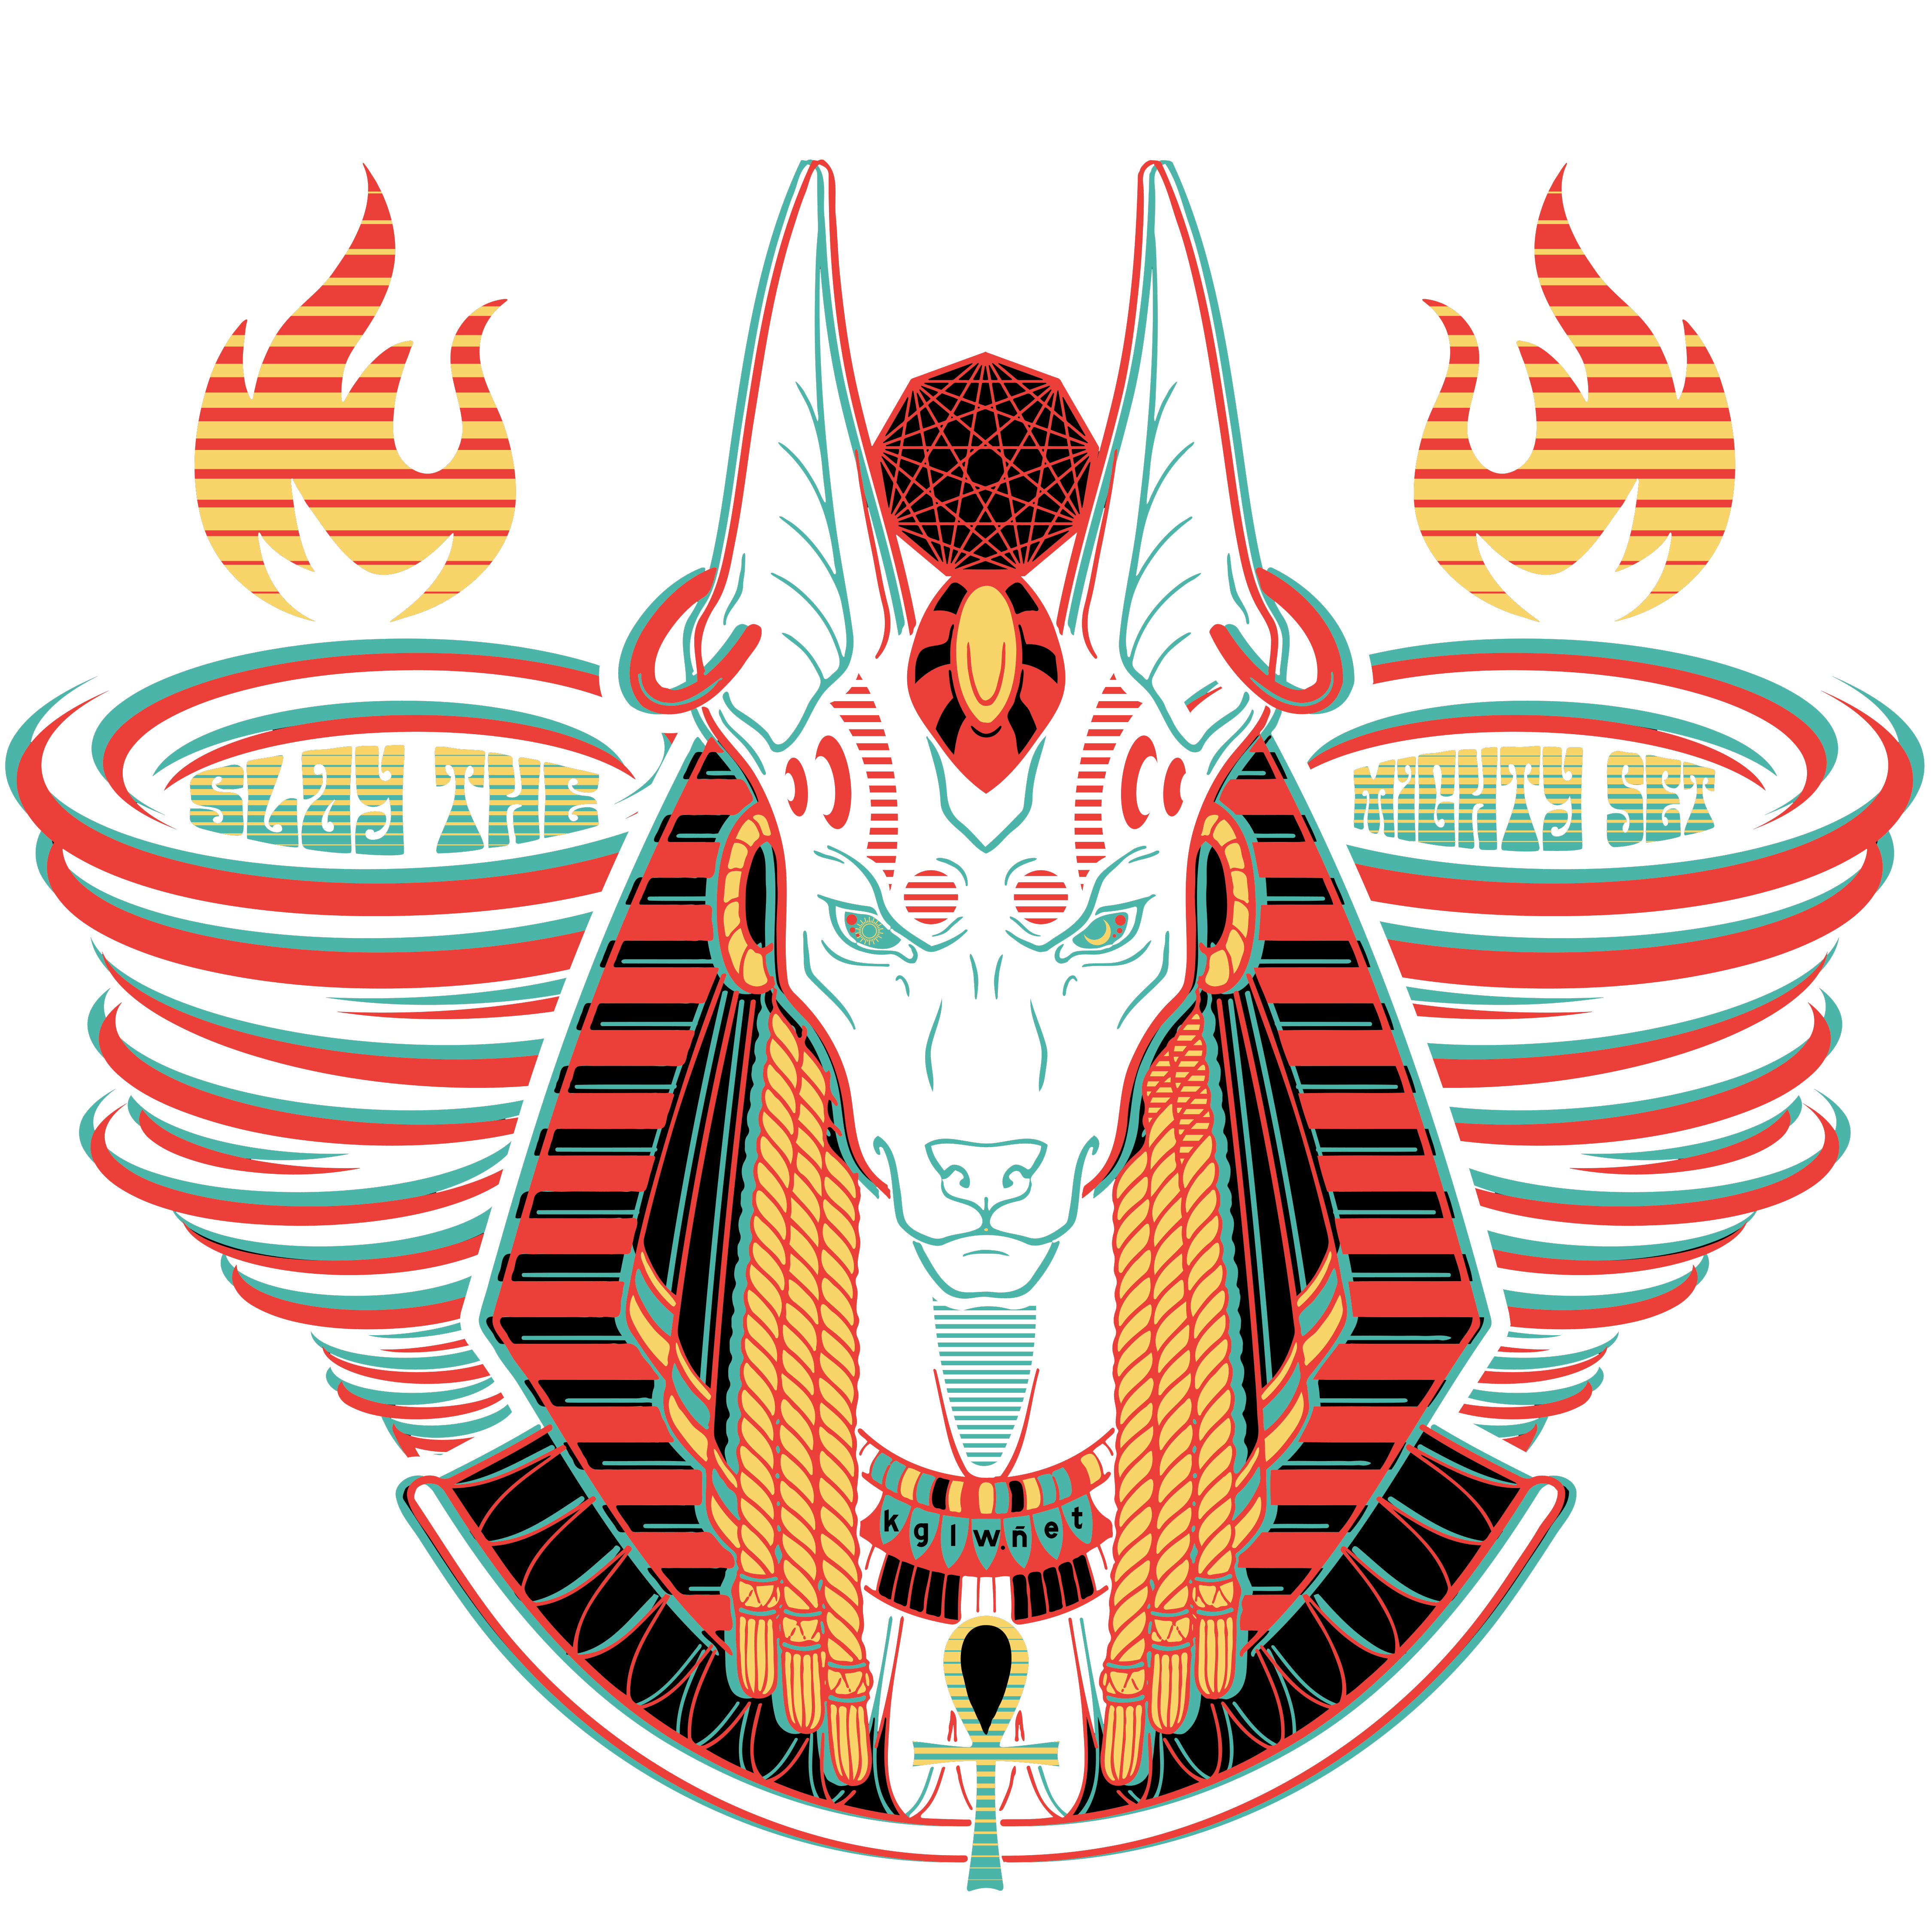 image featuring bust of Egyptian god Set with Nonagon head disk and 'kglw.net' necklace, flanked by pillars reading 'SLAY THE MIGHTY SET'